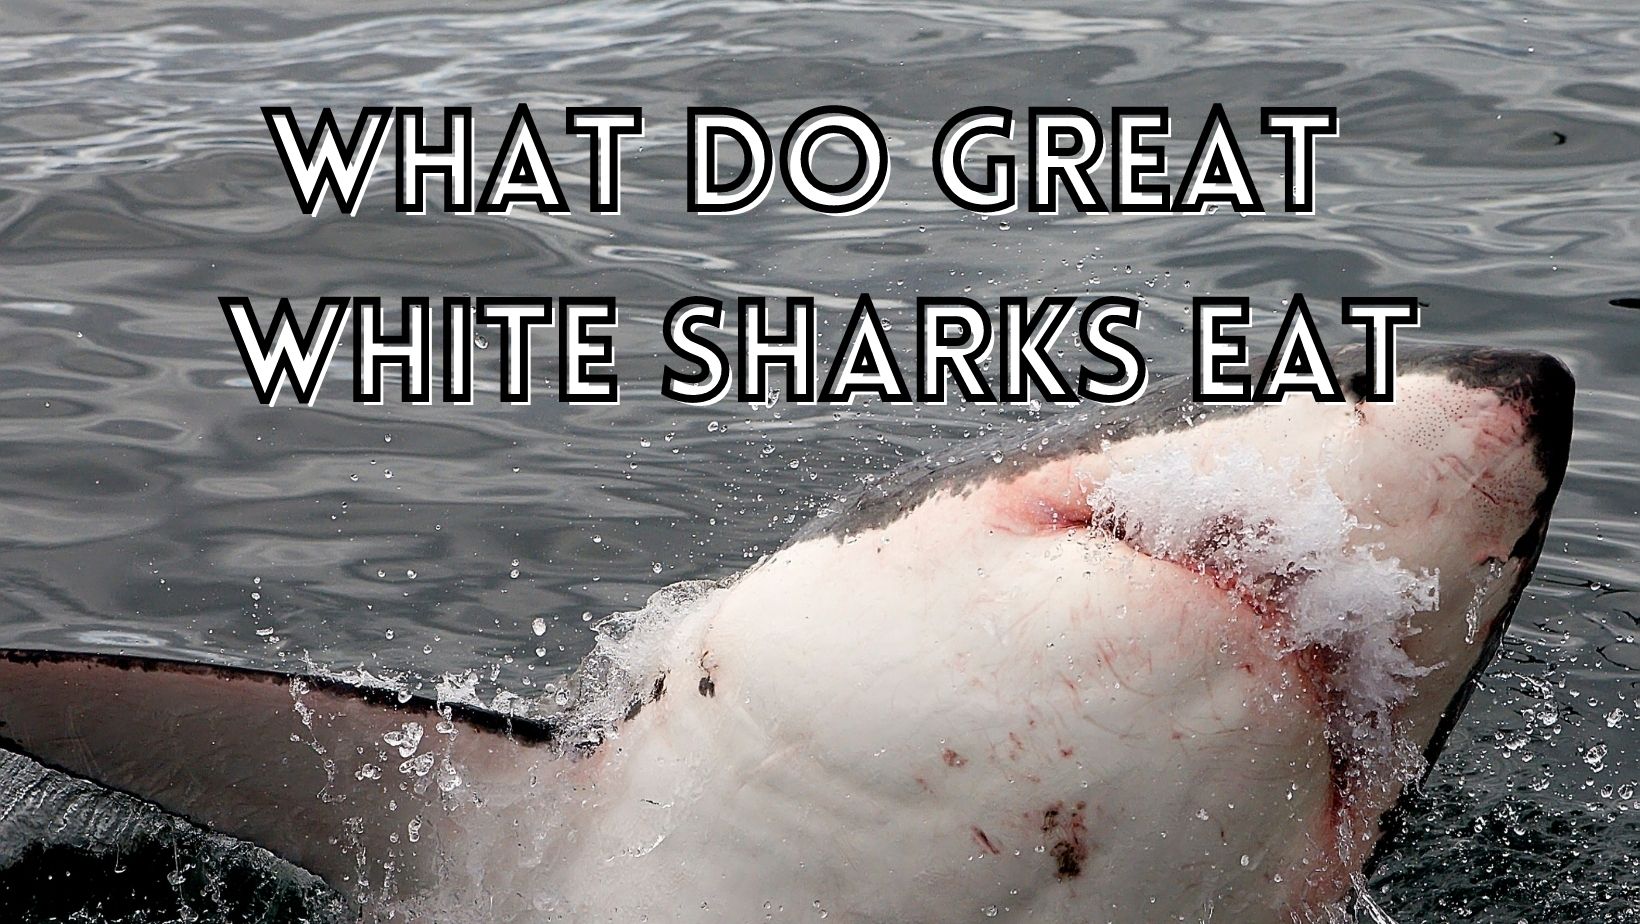 What do great white sharks eat